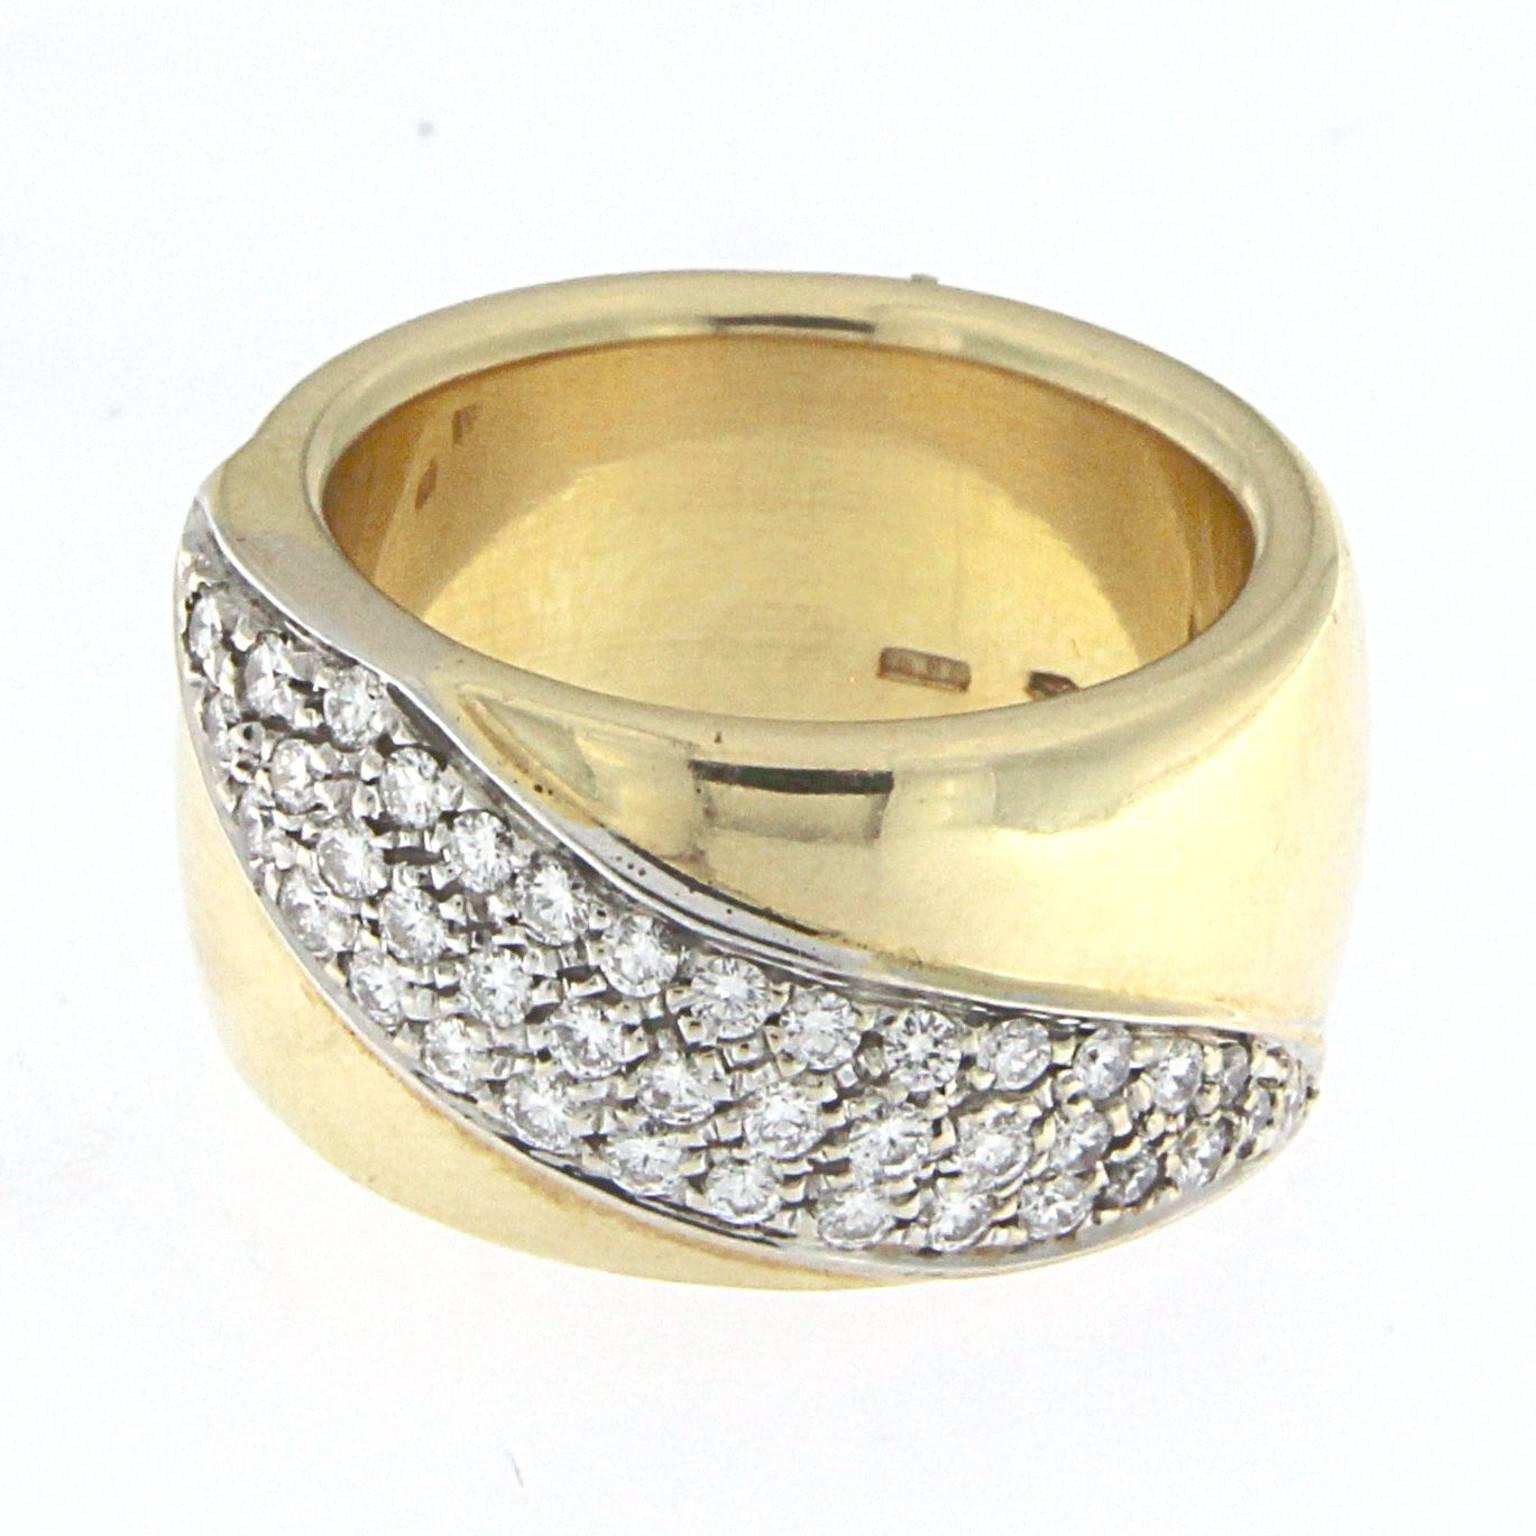 Rigid ring in 18 kt yellow gold embellished with white gold detail and white diamonds

The total weight of the gold is GR 13.50
The total weight of diamonds is ct 0.57  (color HG clarity VVS1)

US SIZE 7
Stamp 10 MI 750

